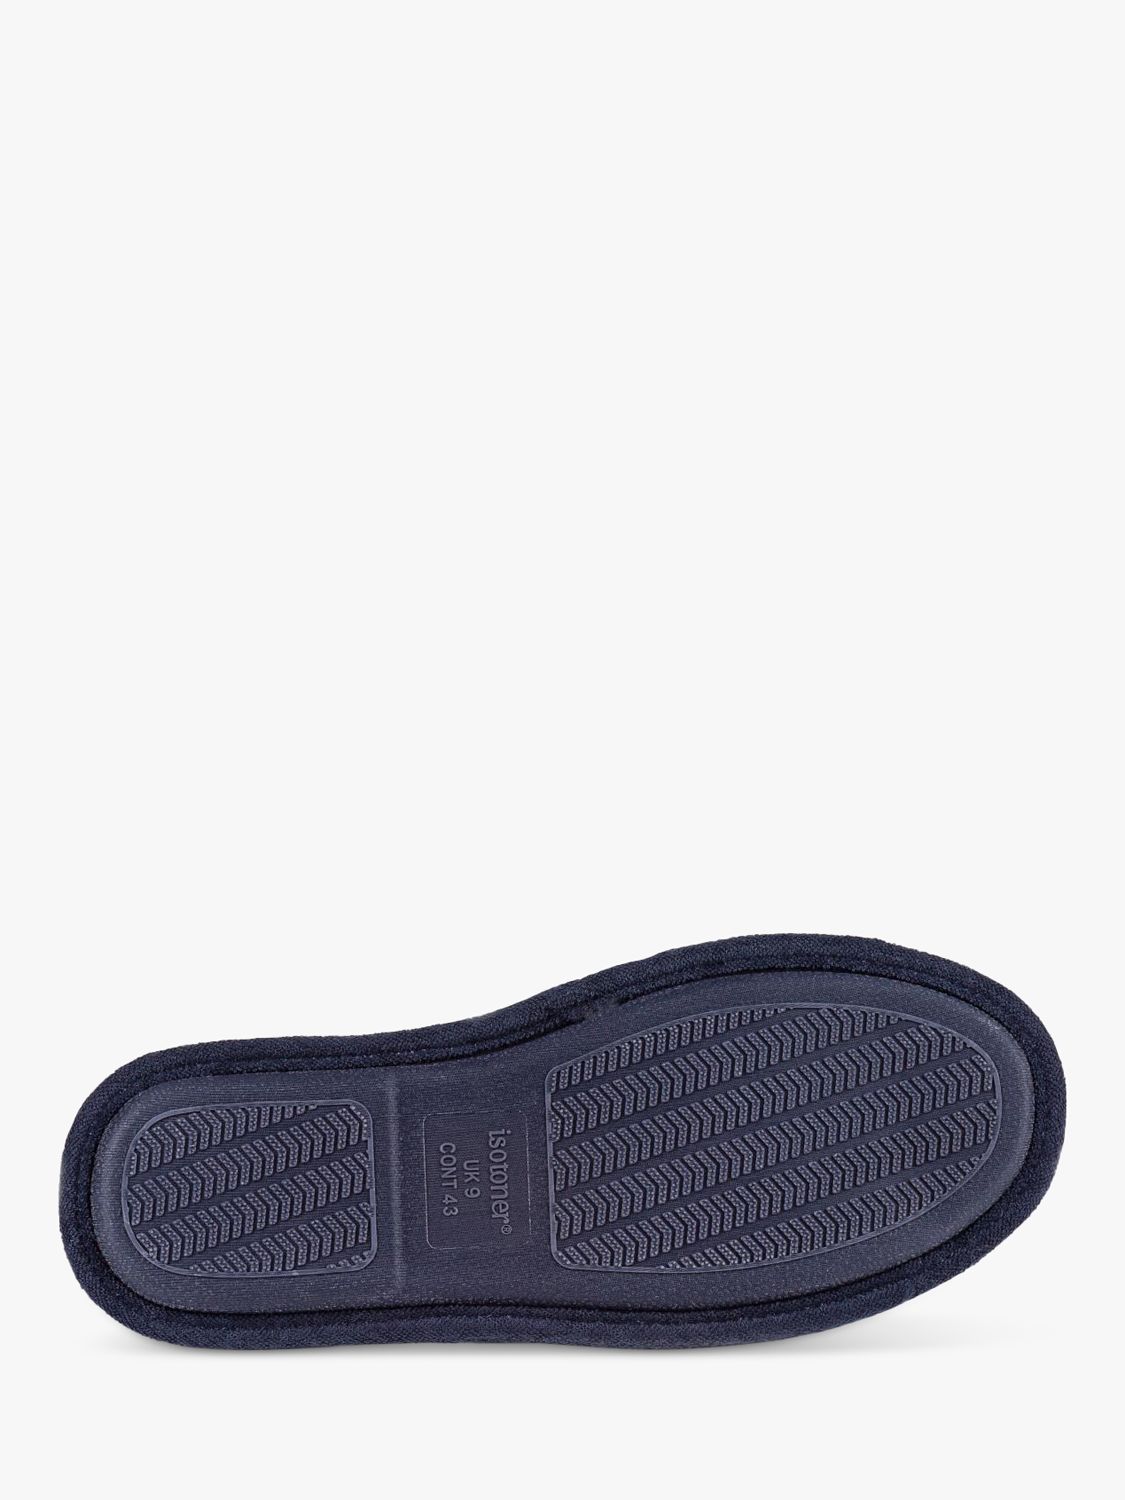 totes Waffle Open Toe Slippers, Navy, 8